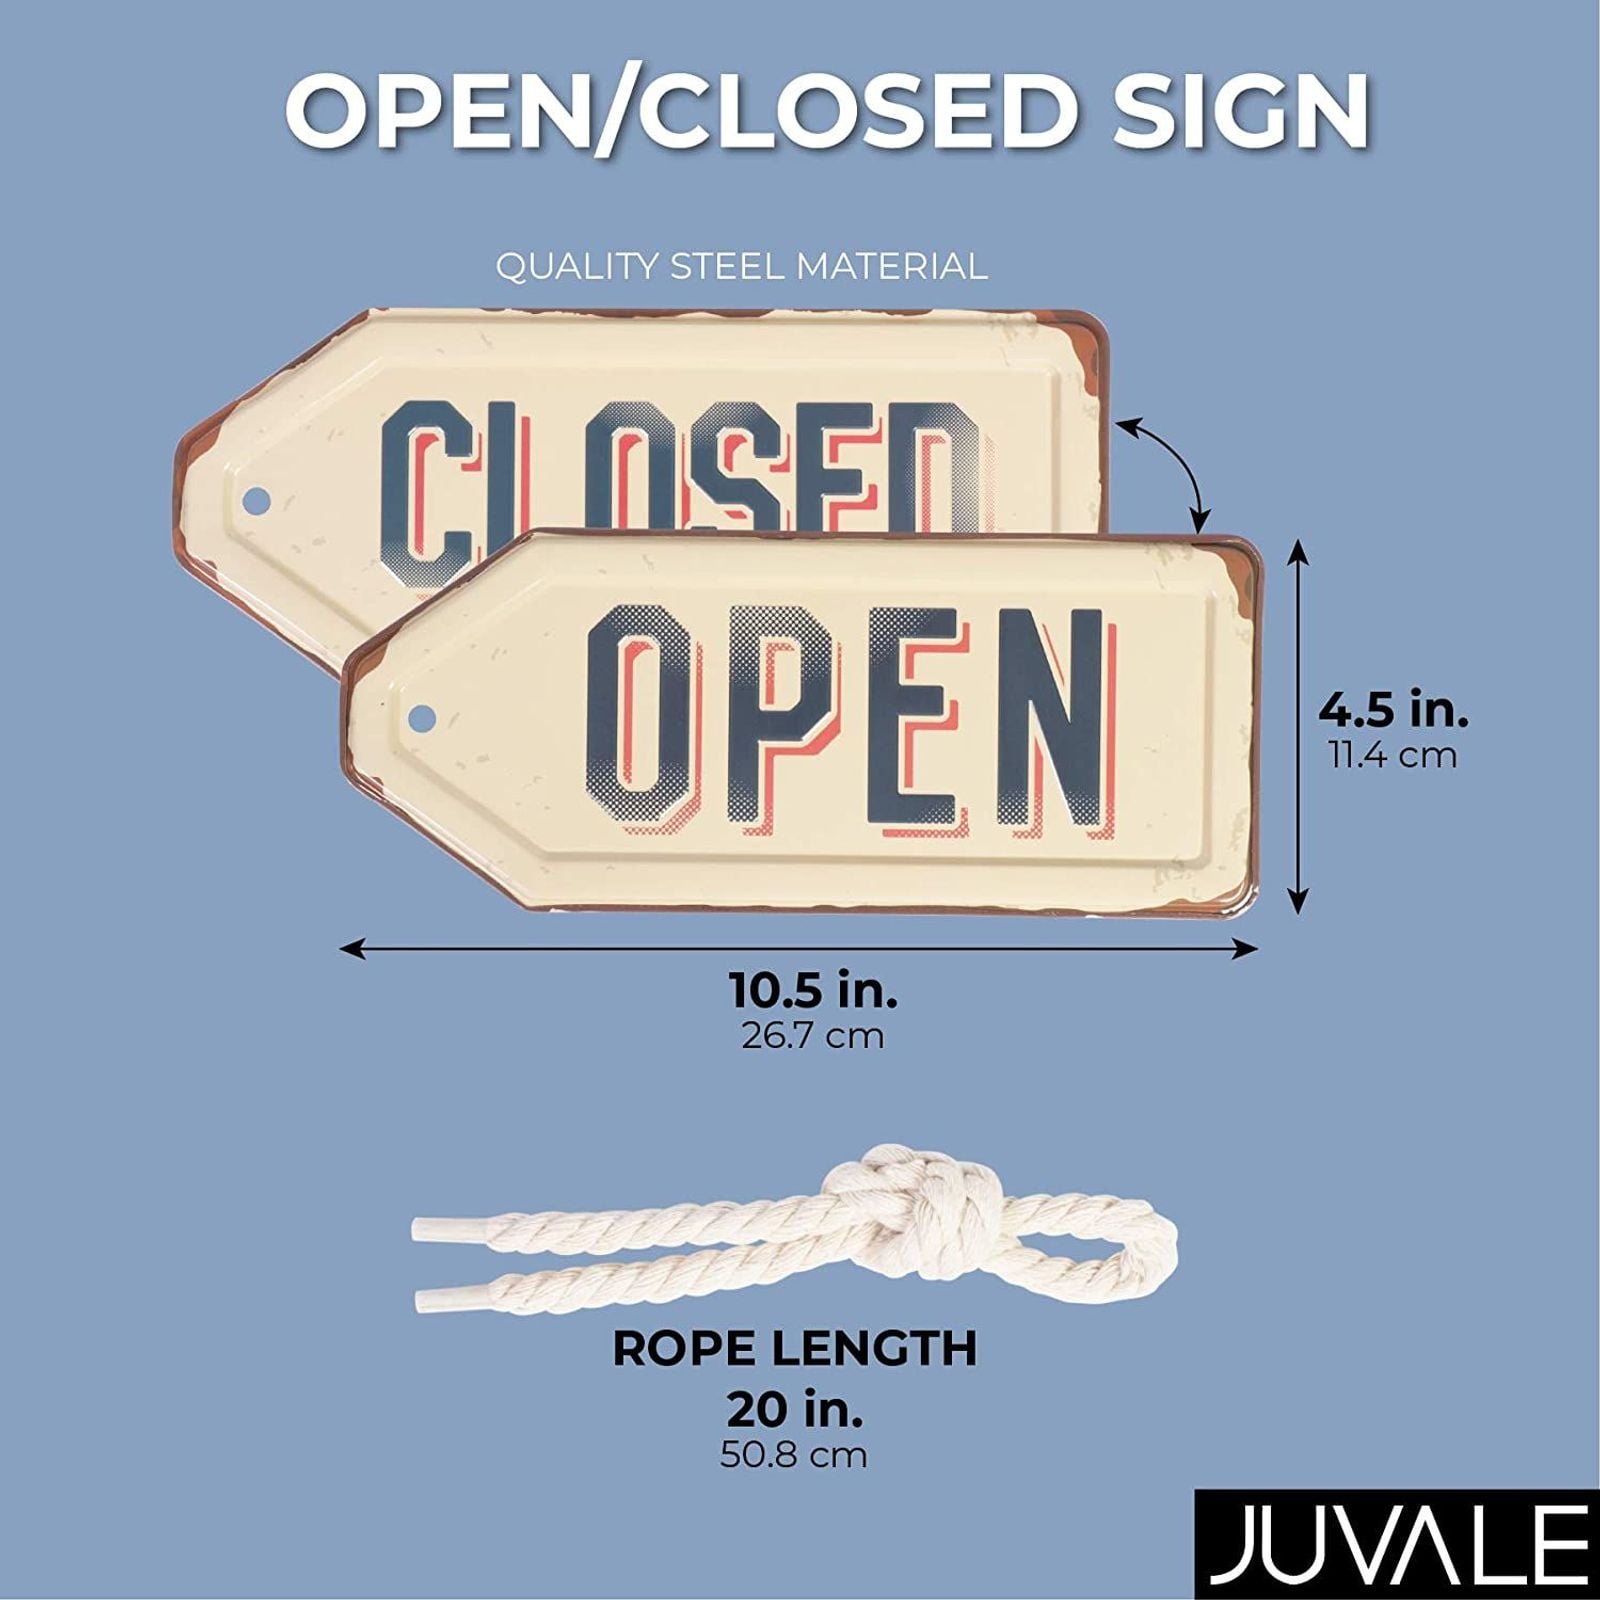 Details about   Reversible Double Sided Metal Open & Closed Sign for Business 10.5"x4.5" White 